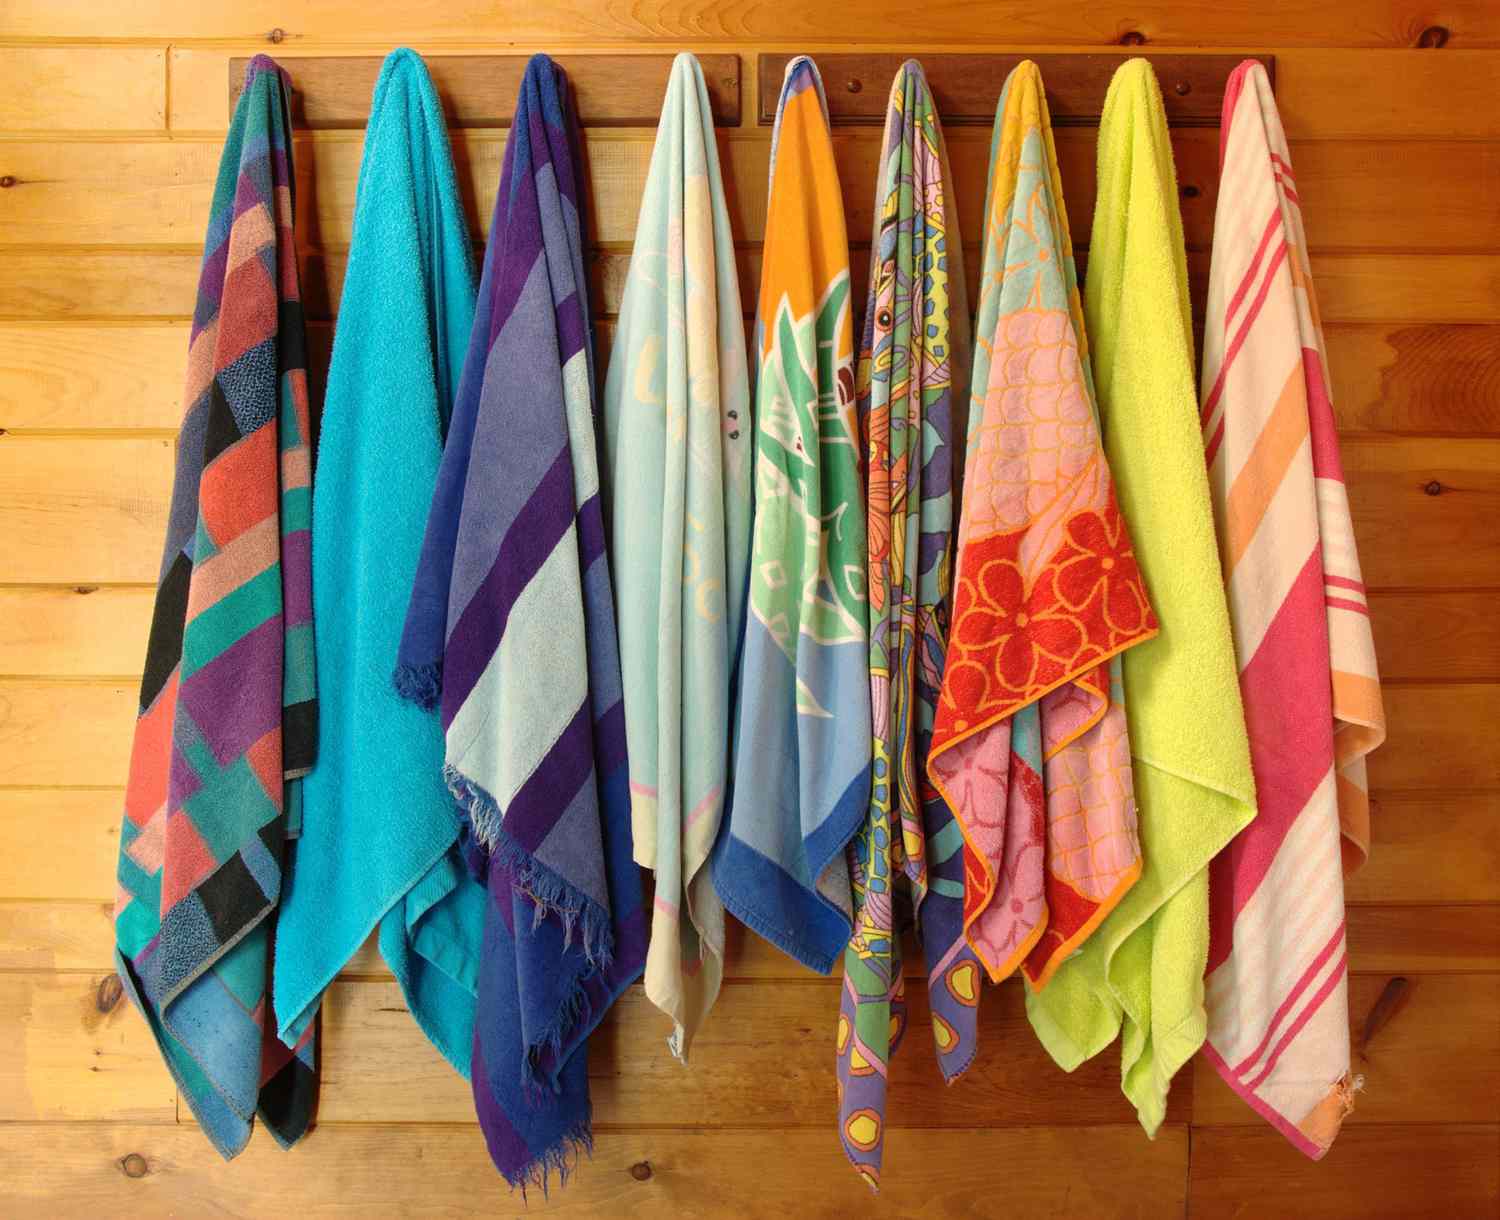 Row of colorful beach towels hanging on hooks